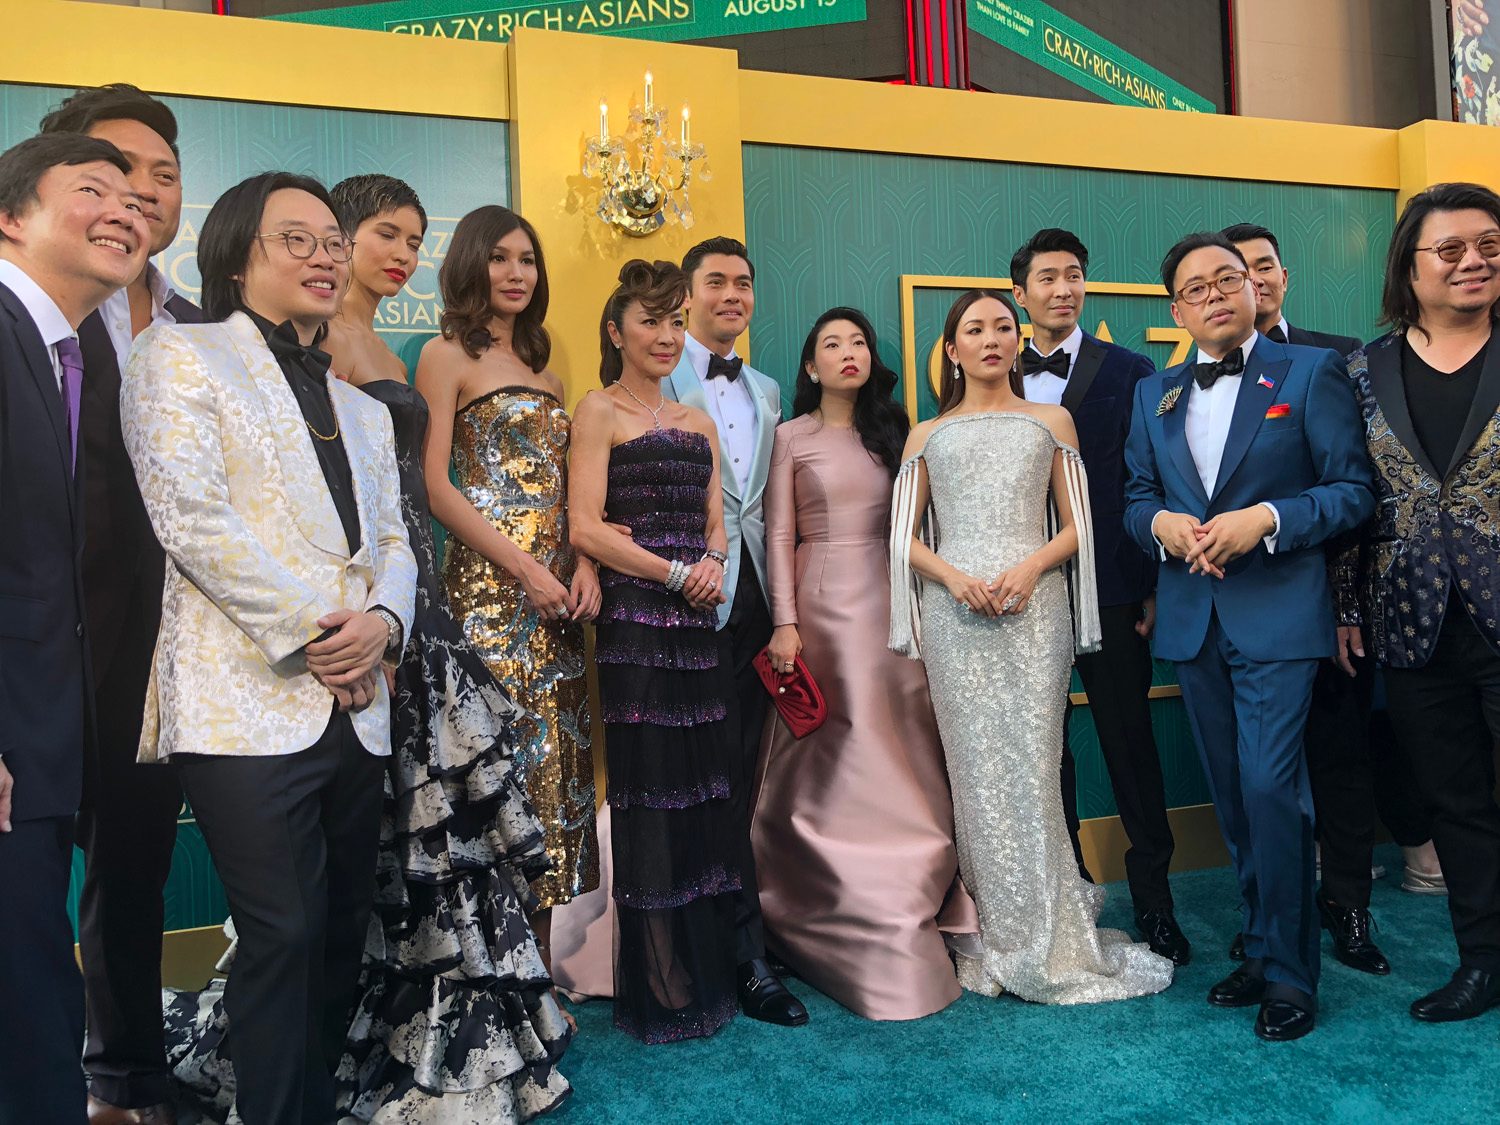 IN PHOTOS: ‘Crazy Rich Asians’ stars shine at Hollywood premiere